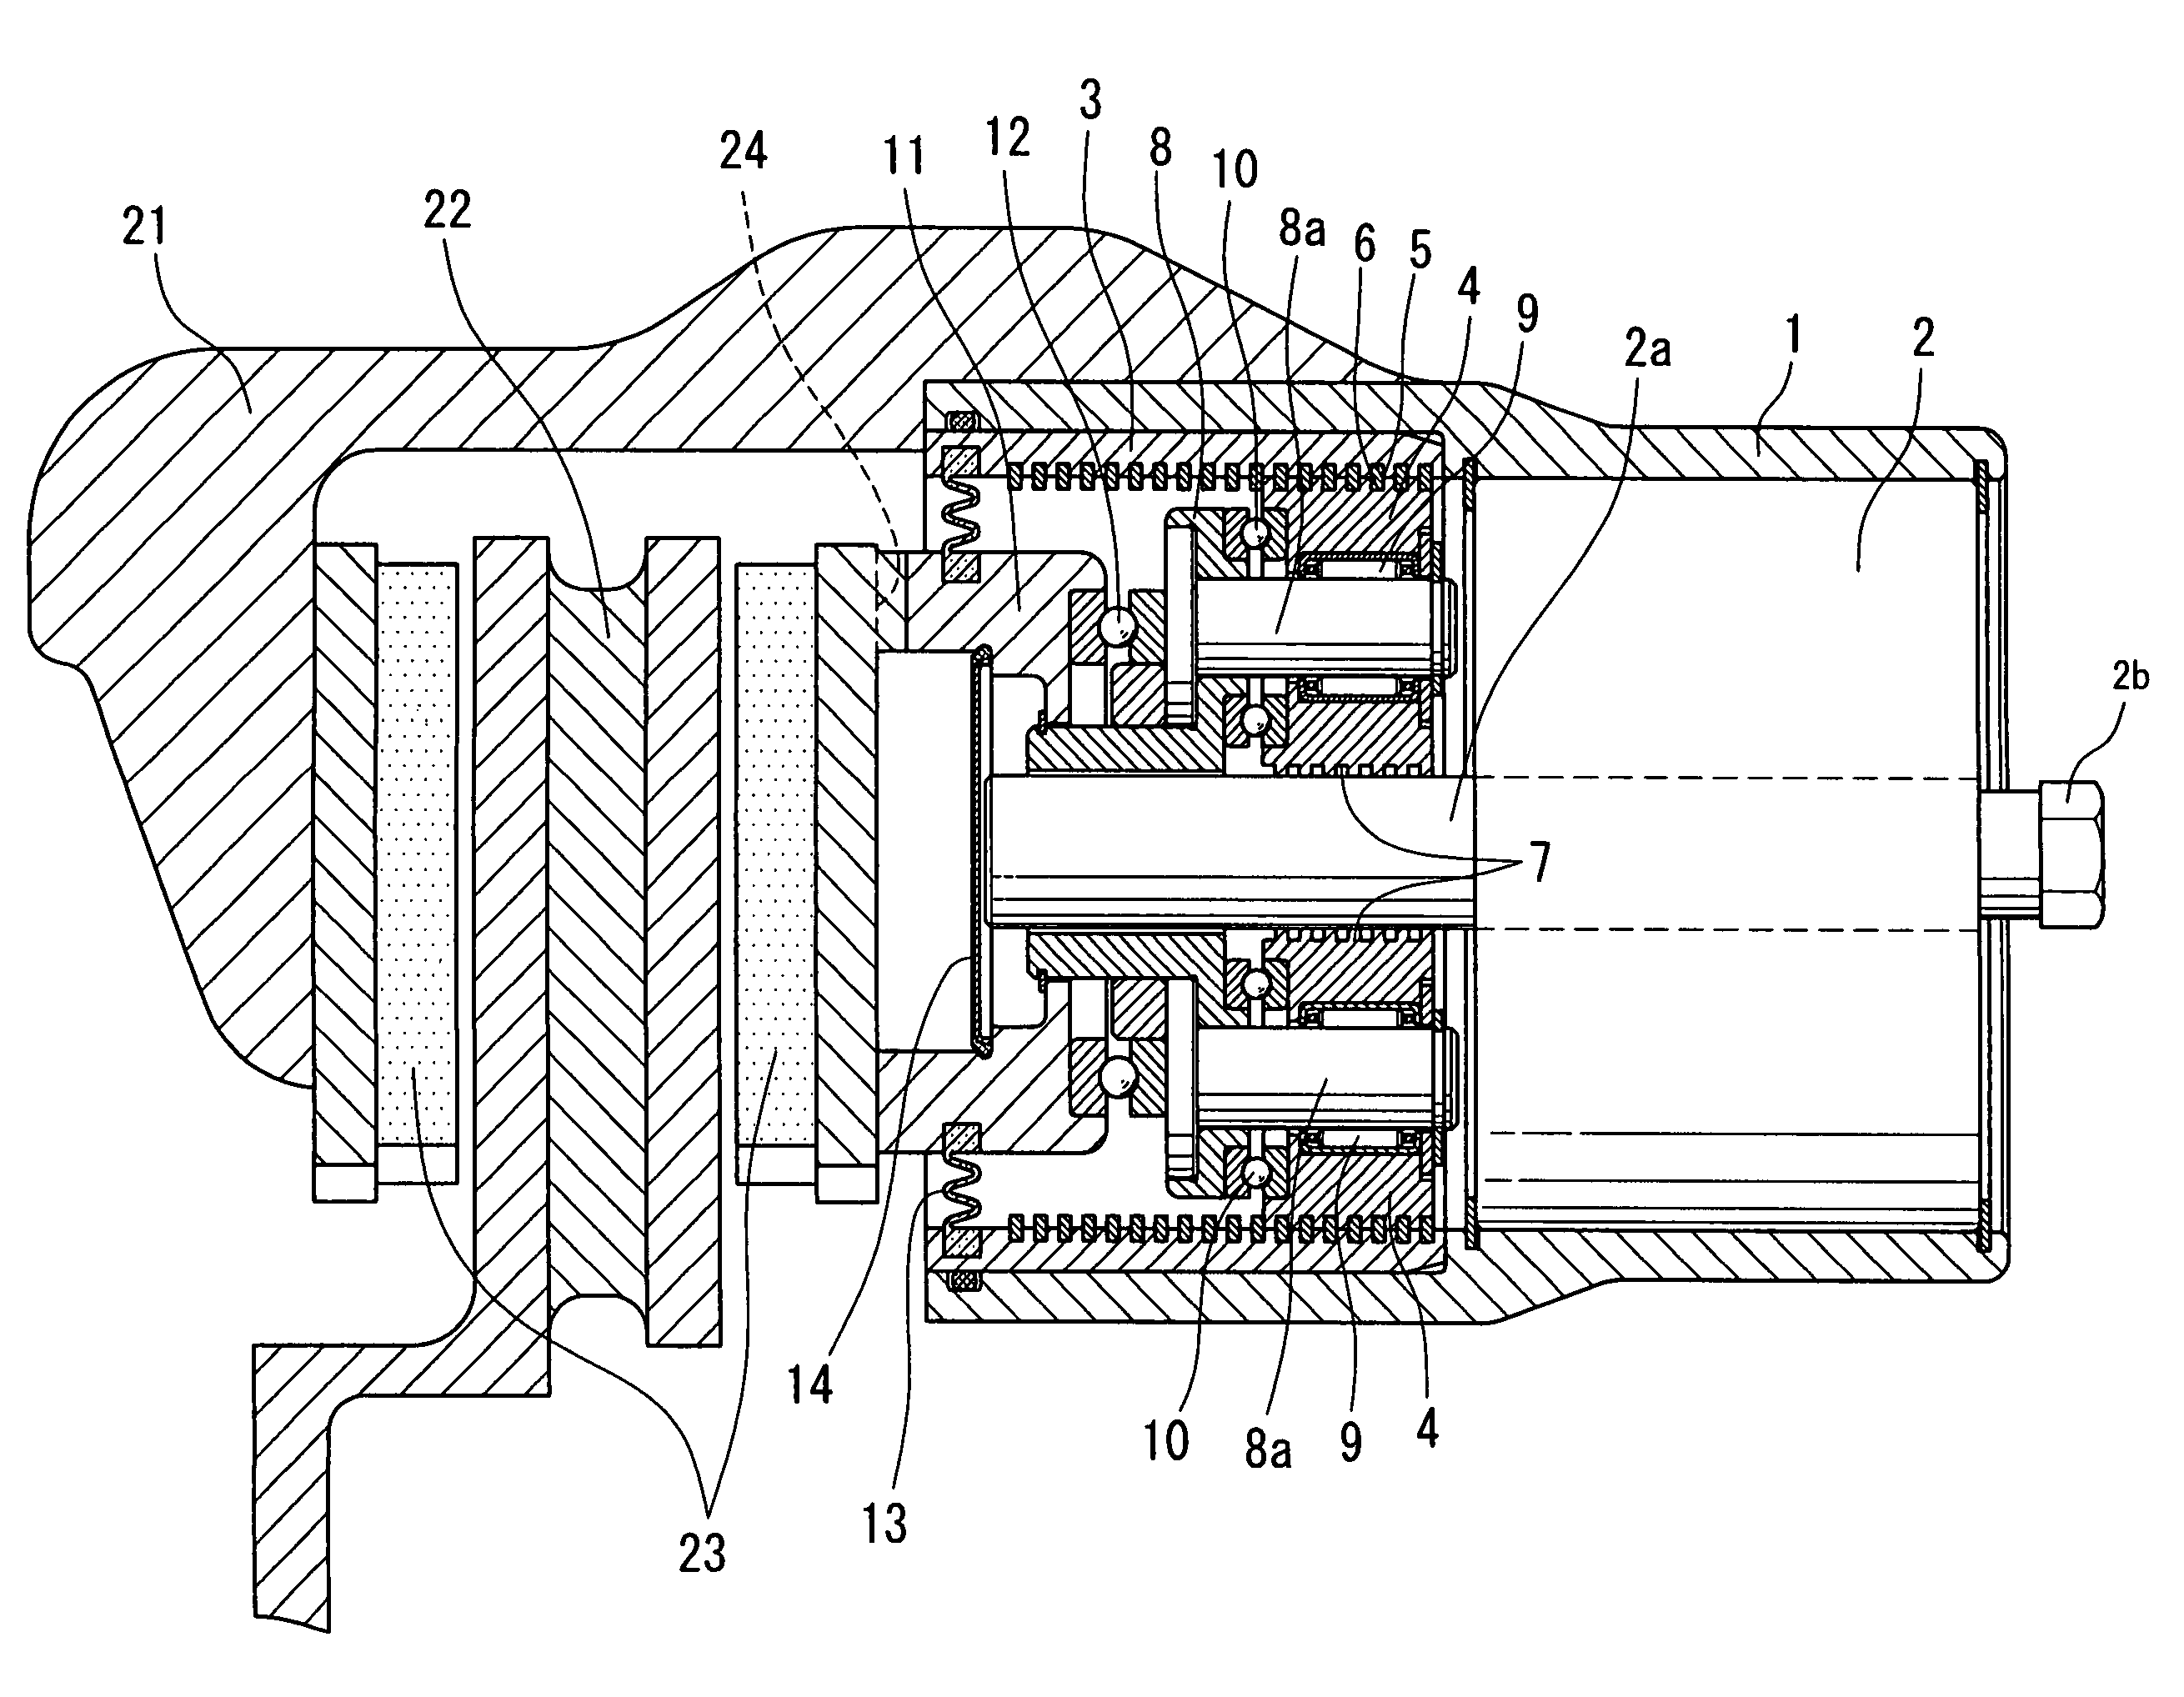 Electric linear-motion actuator and electric brake assembly